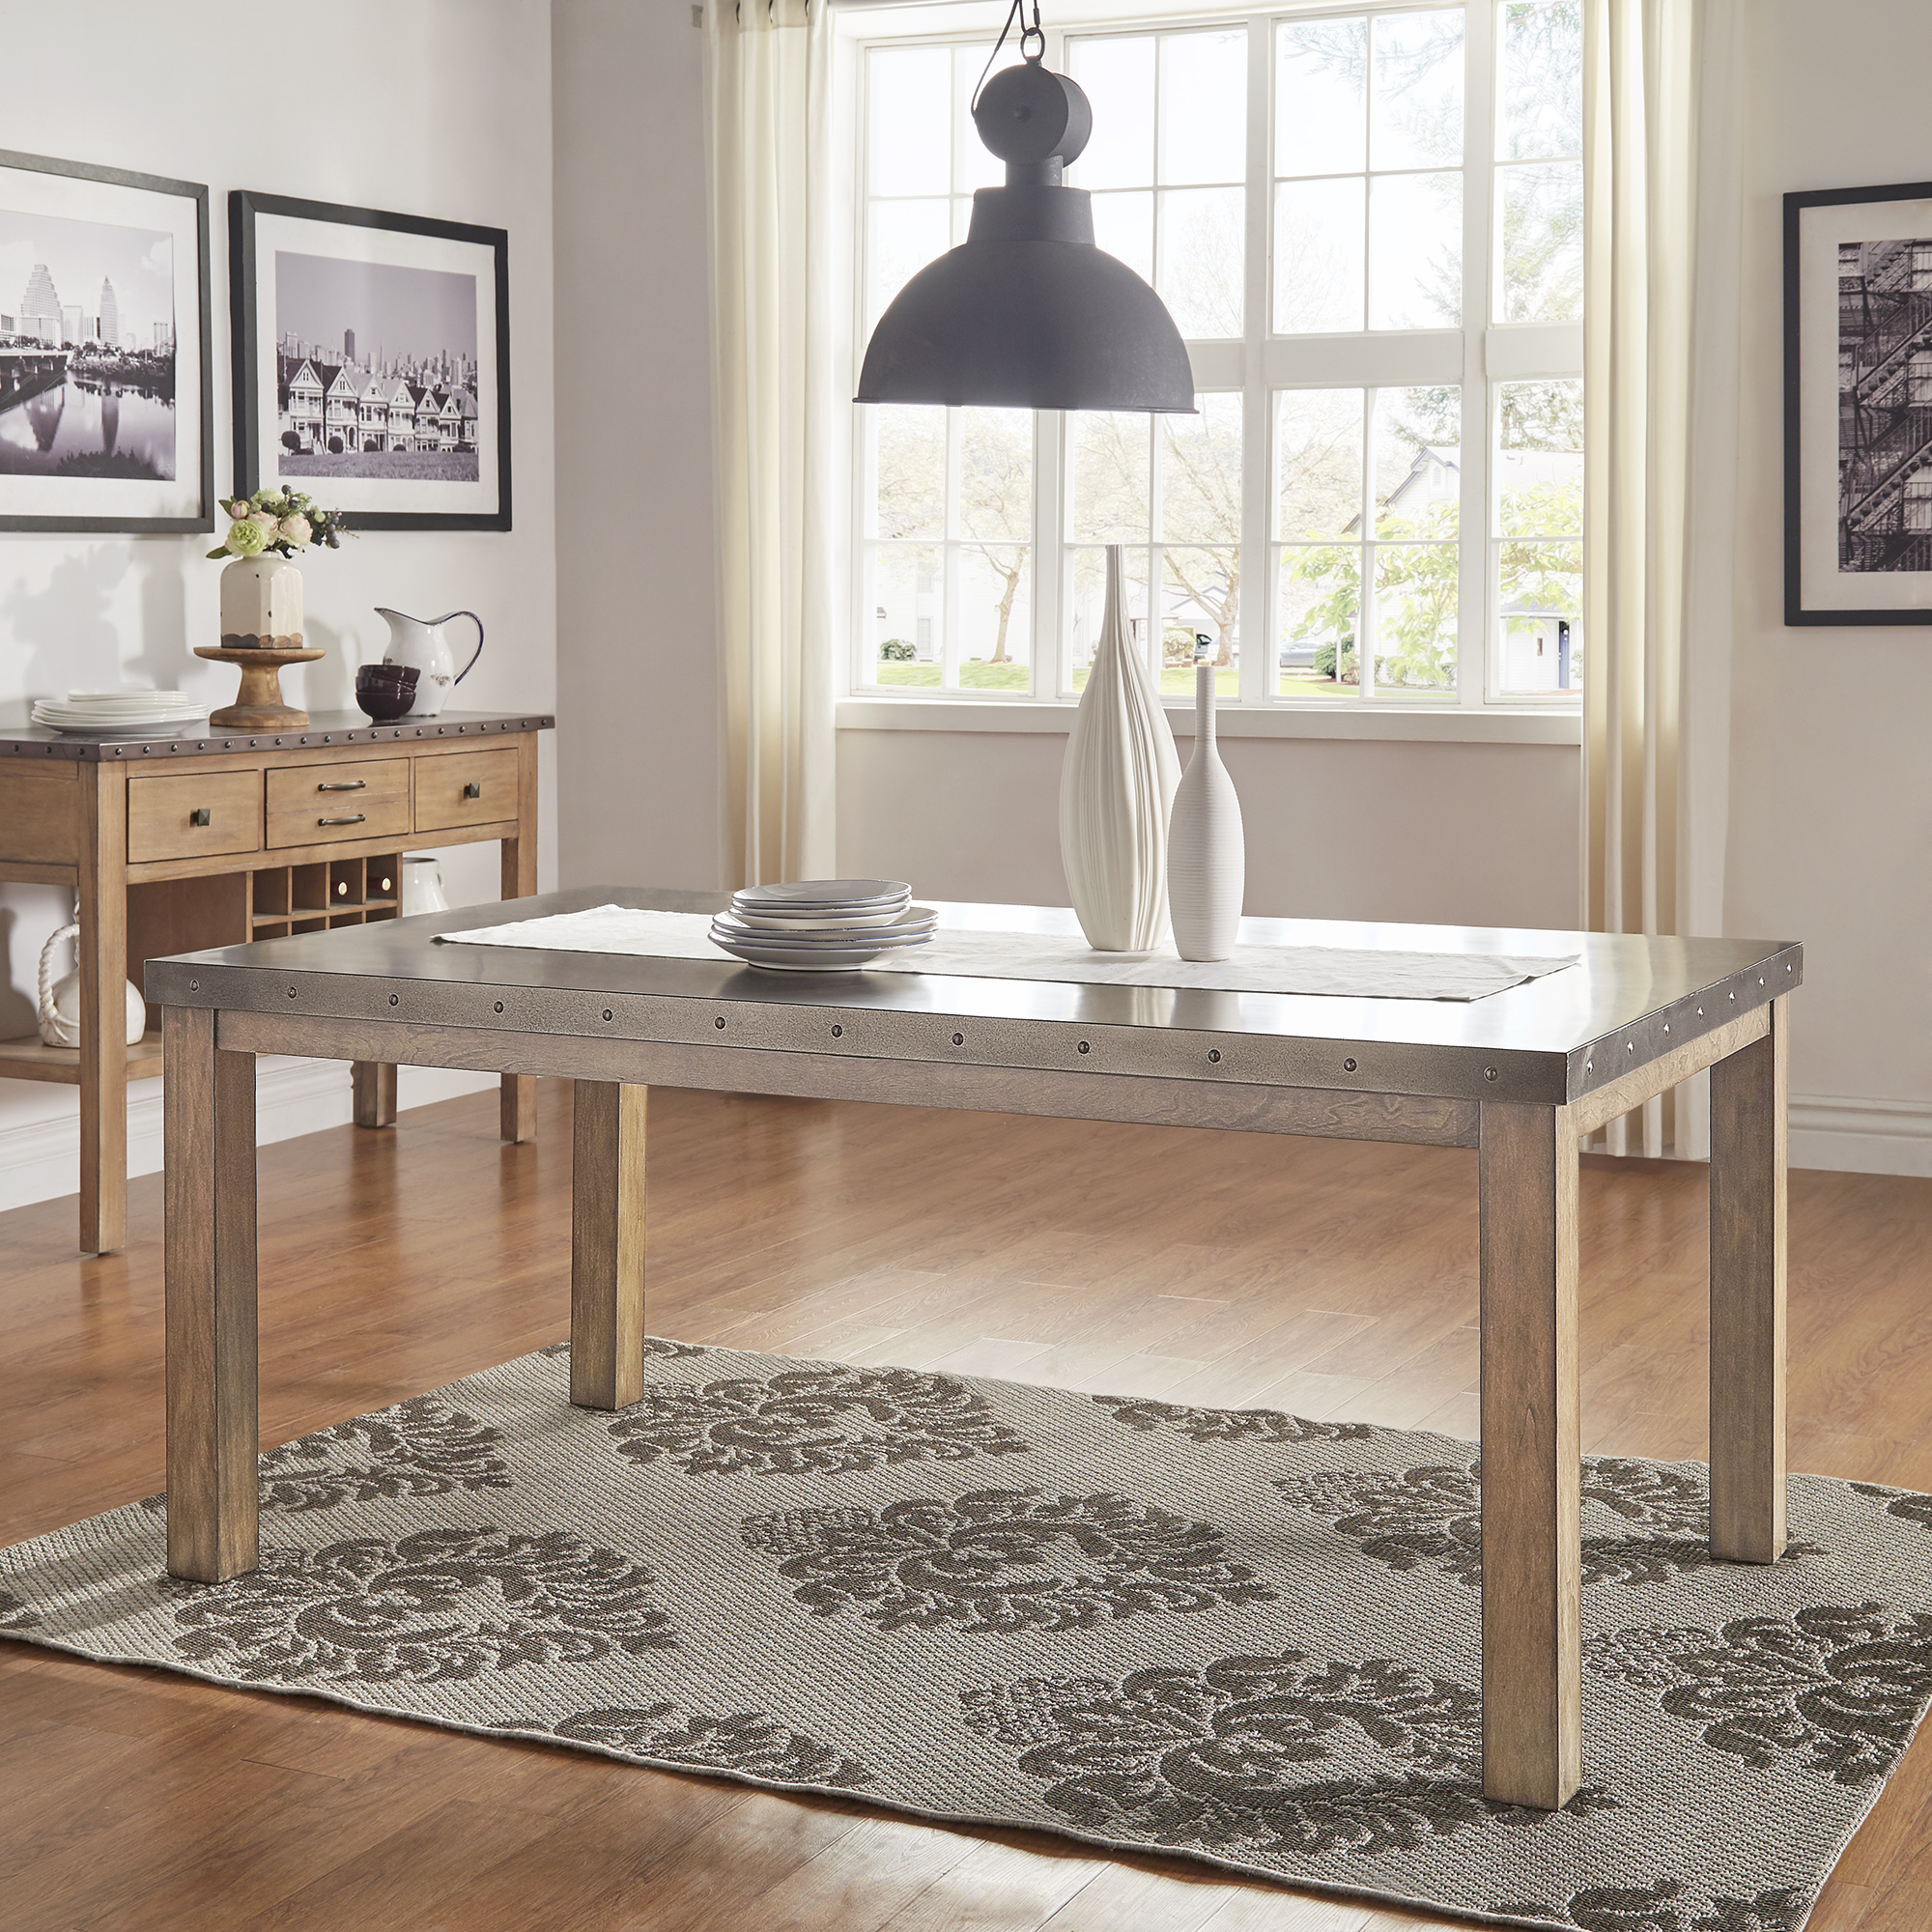 After concrete, we begin to discuss metals. This image focuses on stainless steel, as it features the Stainless Steel Top Rectangle Dining Table by iNSPIRE Q Artisan. The table also boasts a rustic wood finish base, enhancing the industrial, loft-inspired look the table aims to deliver.